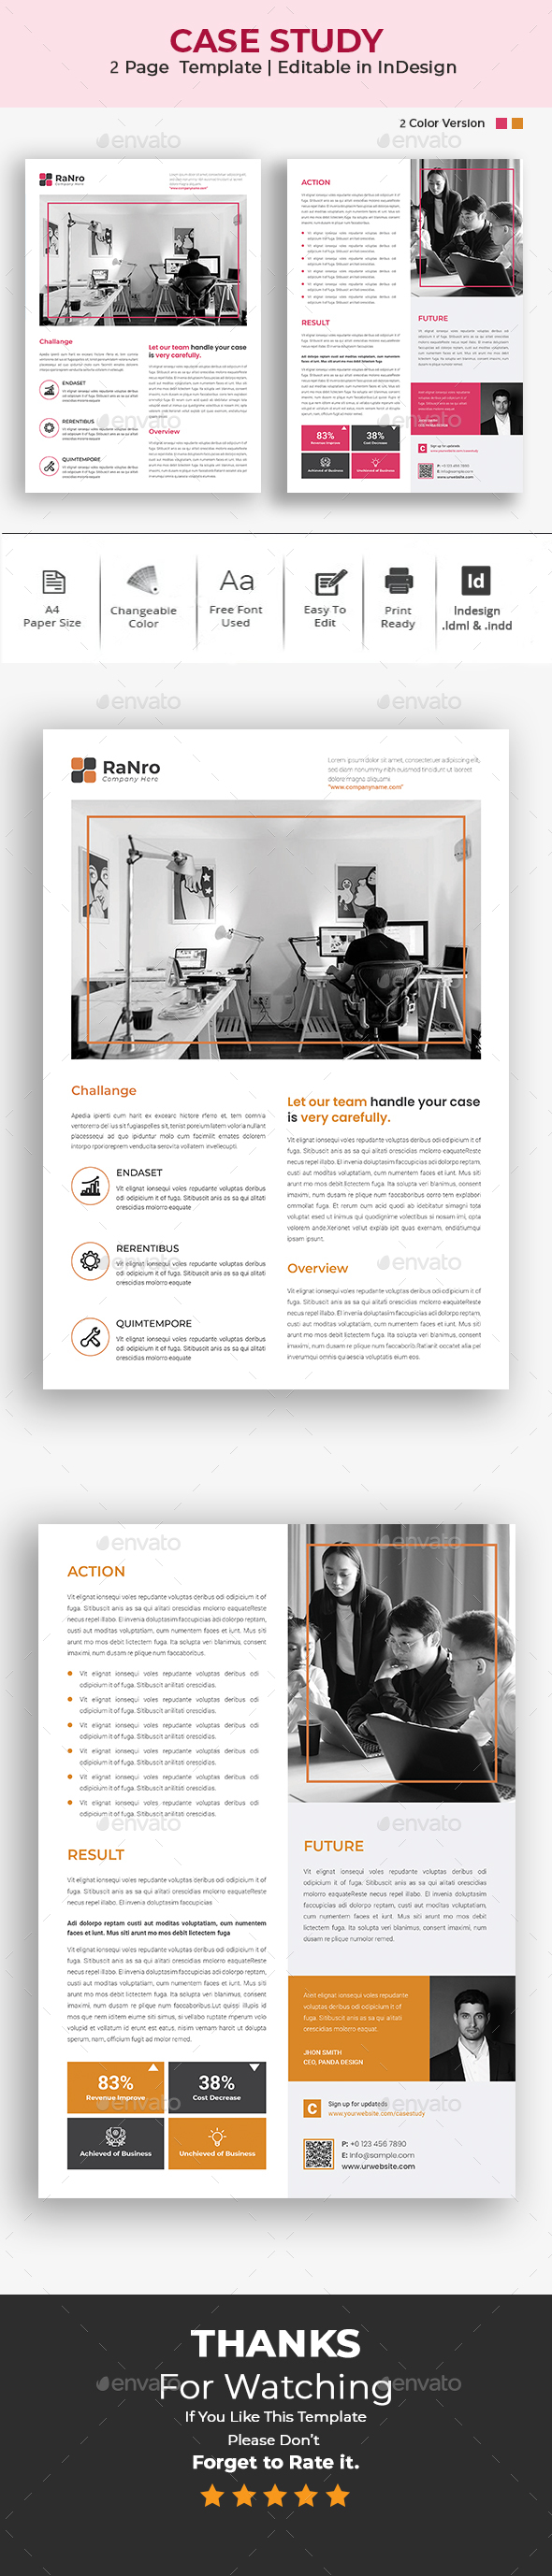 Case Study Template | InDesign